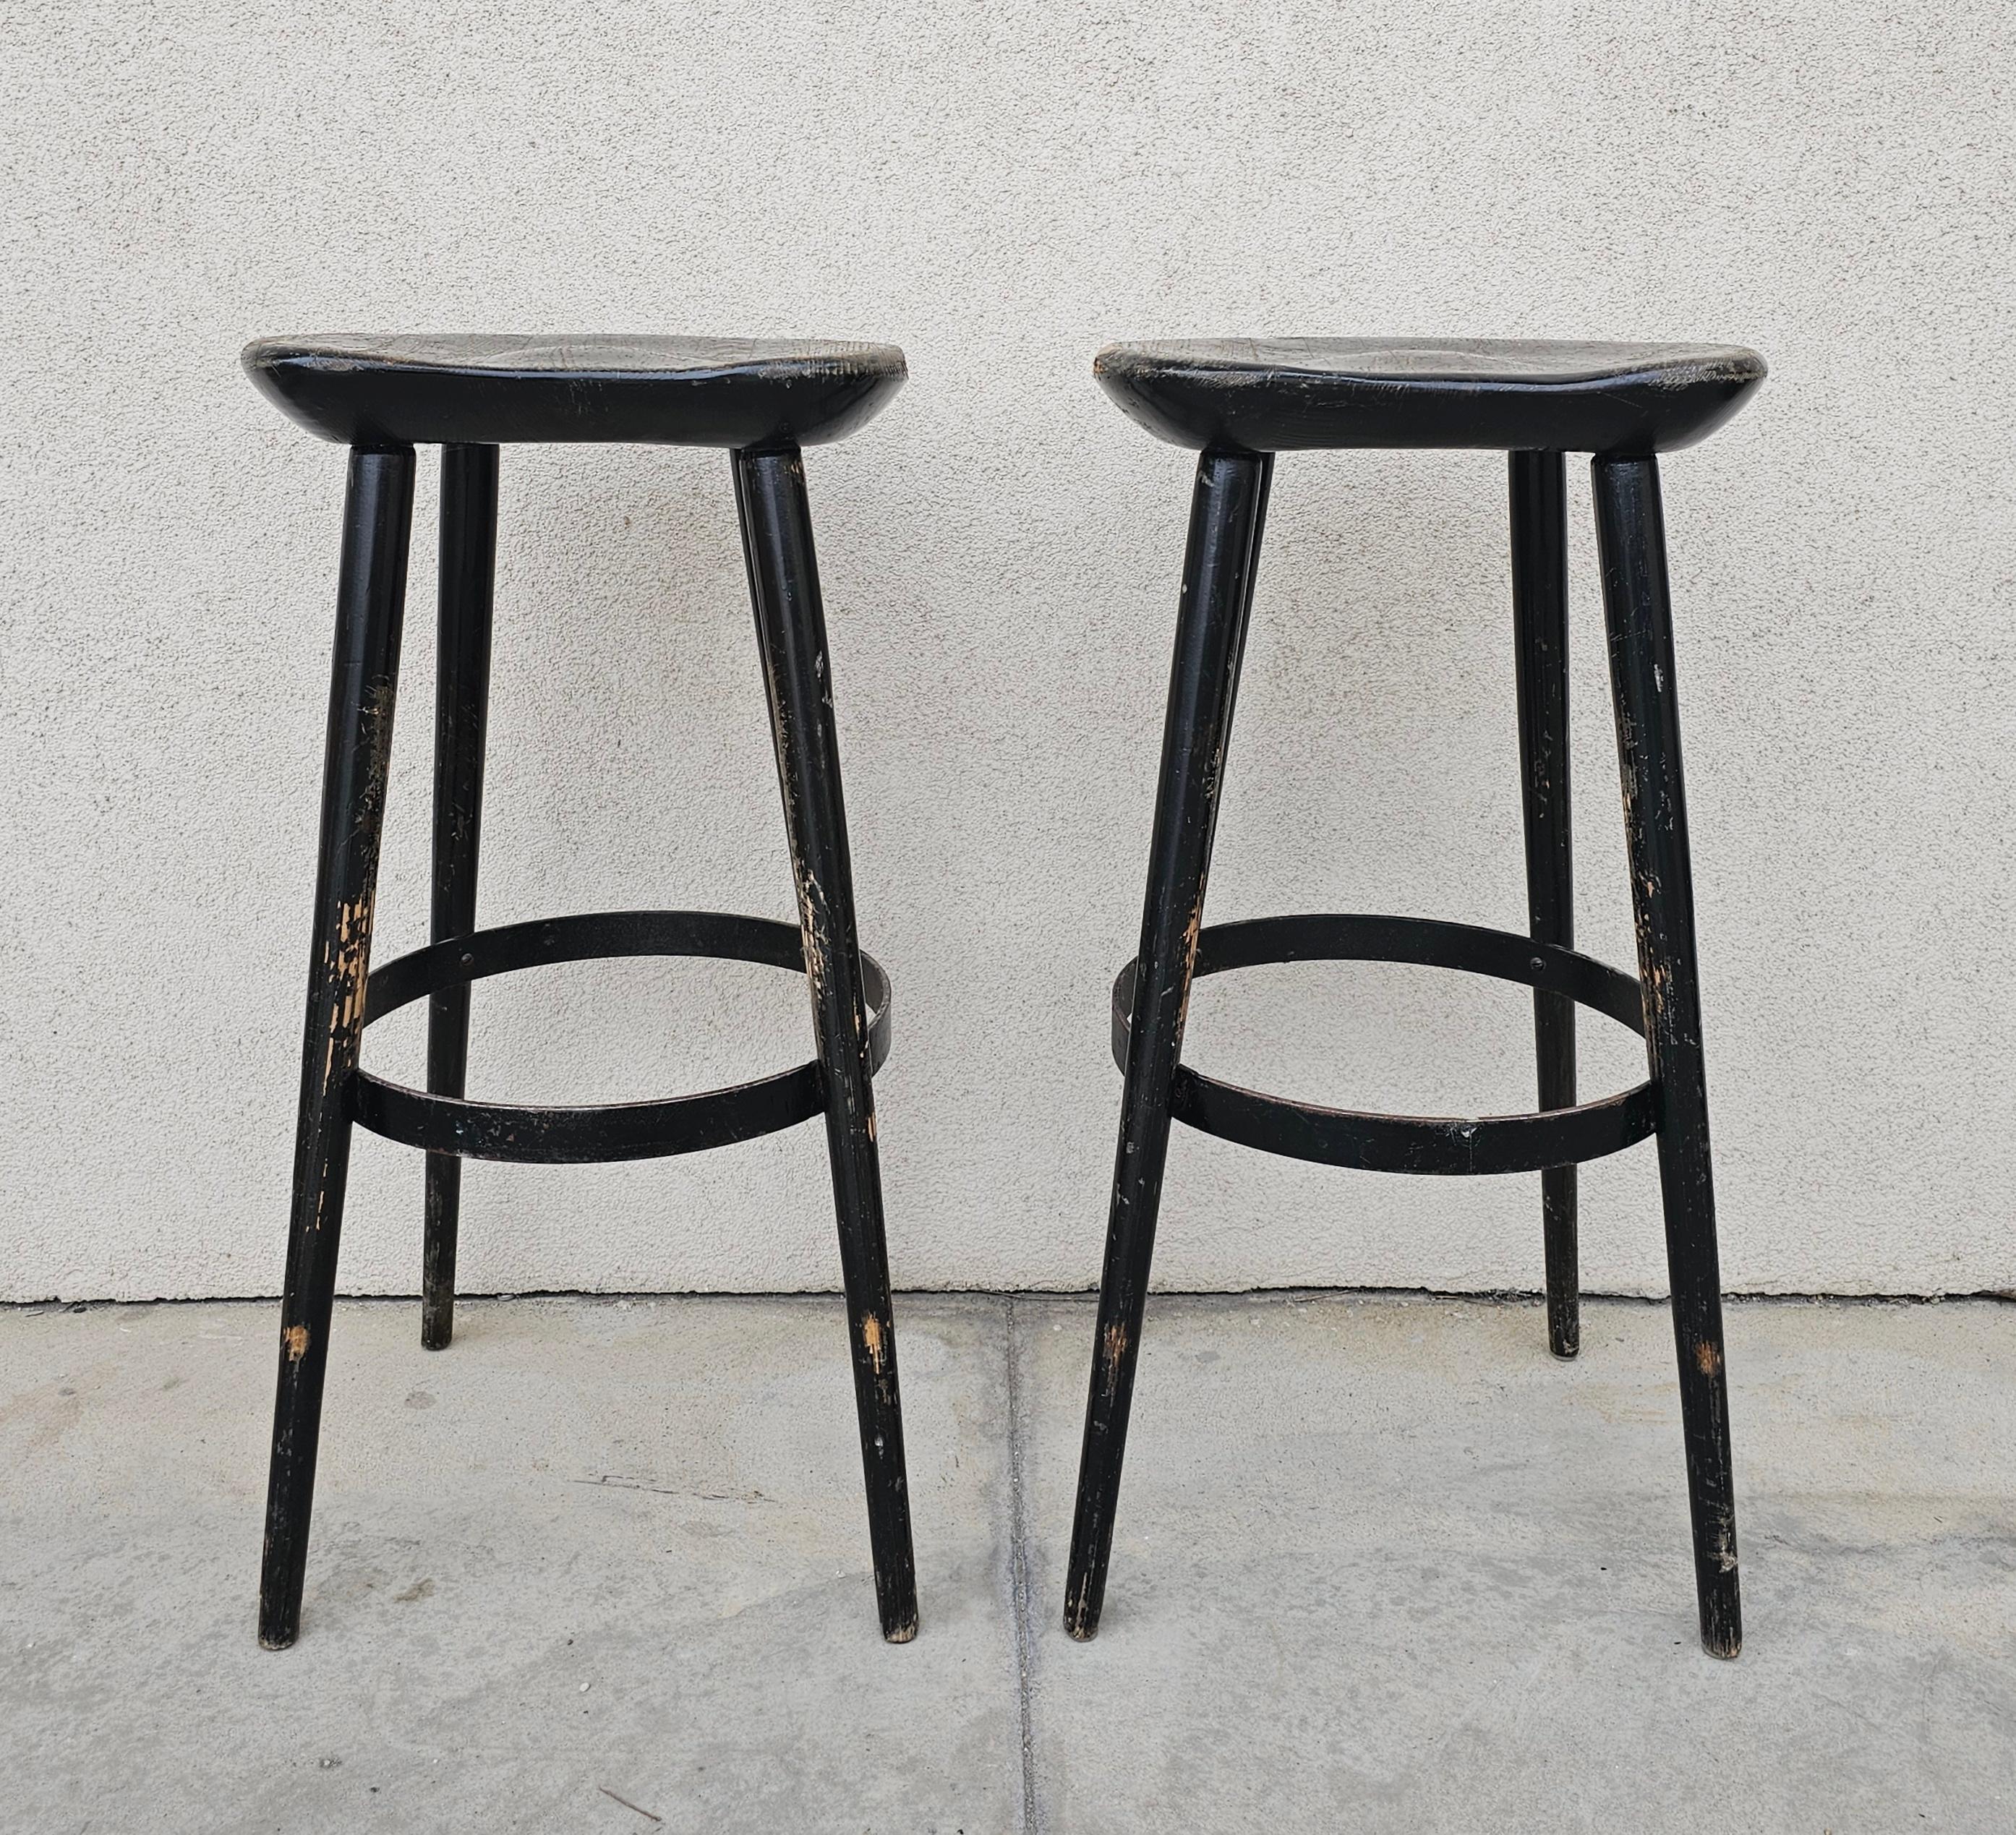 In this listing you will find a pair of antique bar stools with kidney shaped seats. Stools are made in solid oak, with the iron foot rest ring. Made in Austria cca. 1910s.

Stools are in fair antique condition with visible signs of time and use,